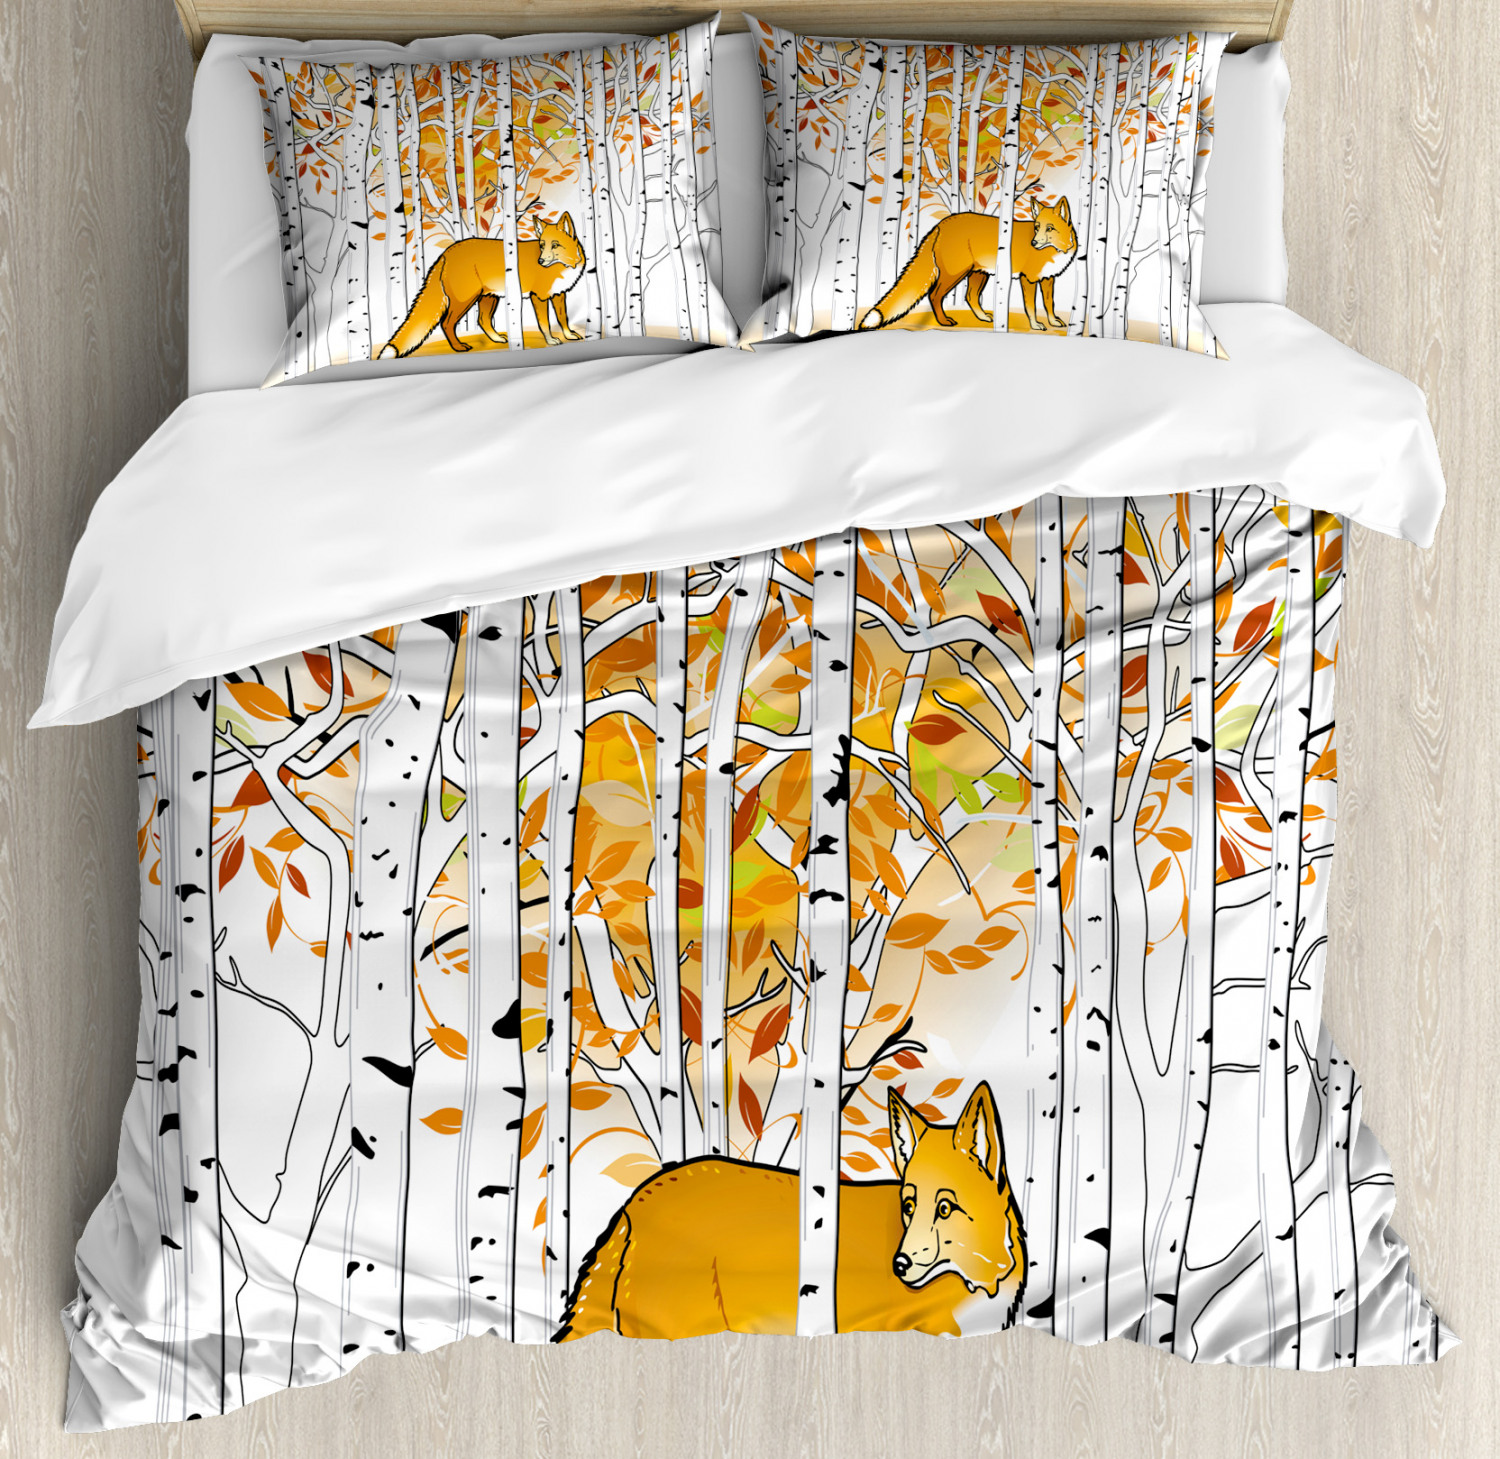 Hunting Duvet Cover Set With Pillow Shams Fox Autumn Forest Print